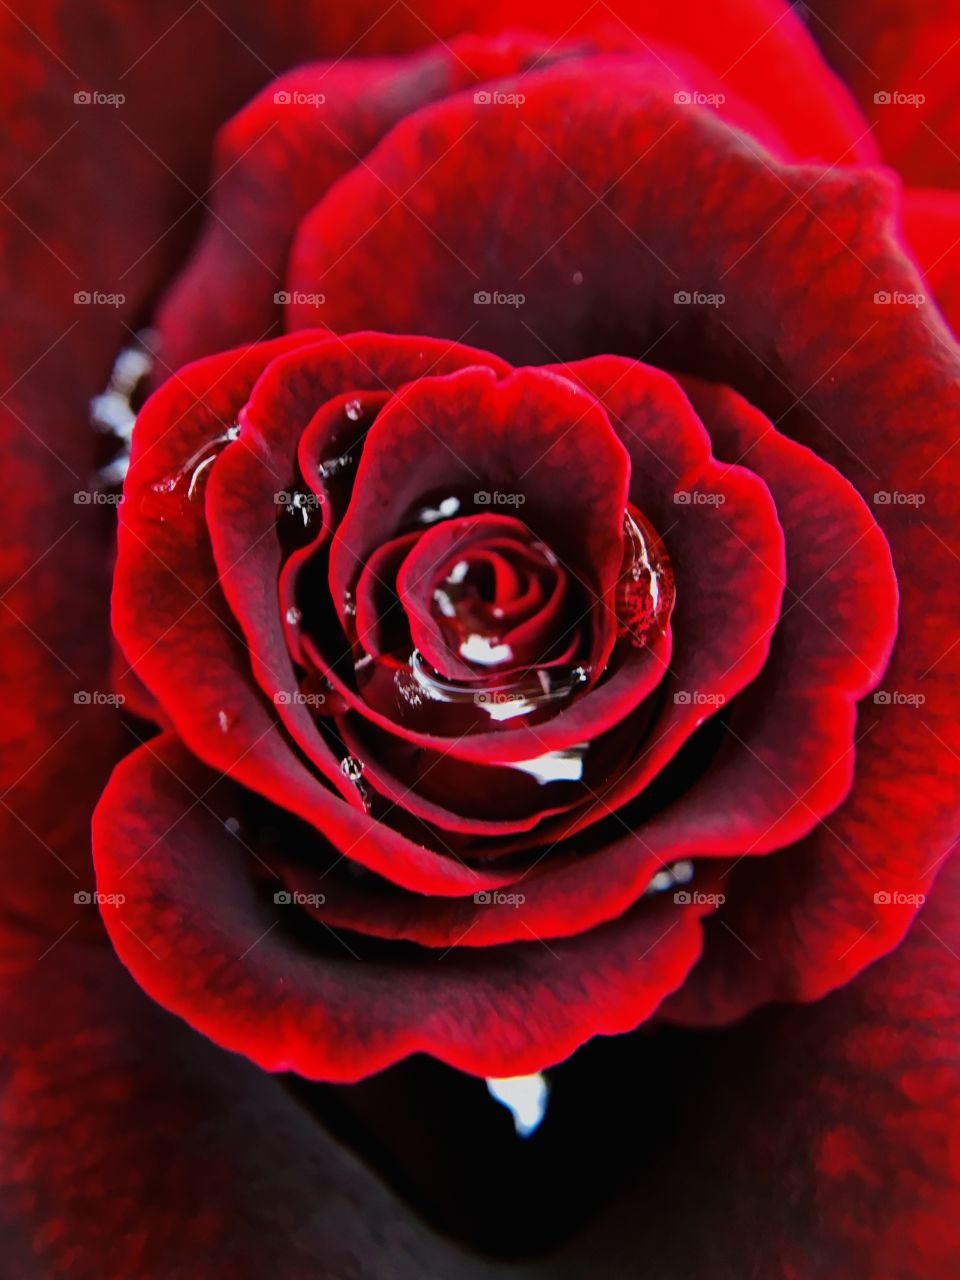 RED rose with water dew